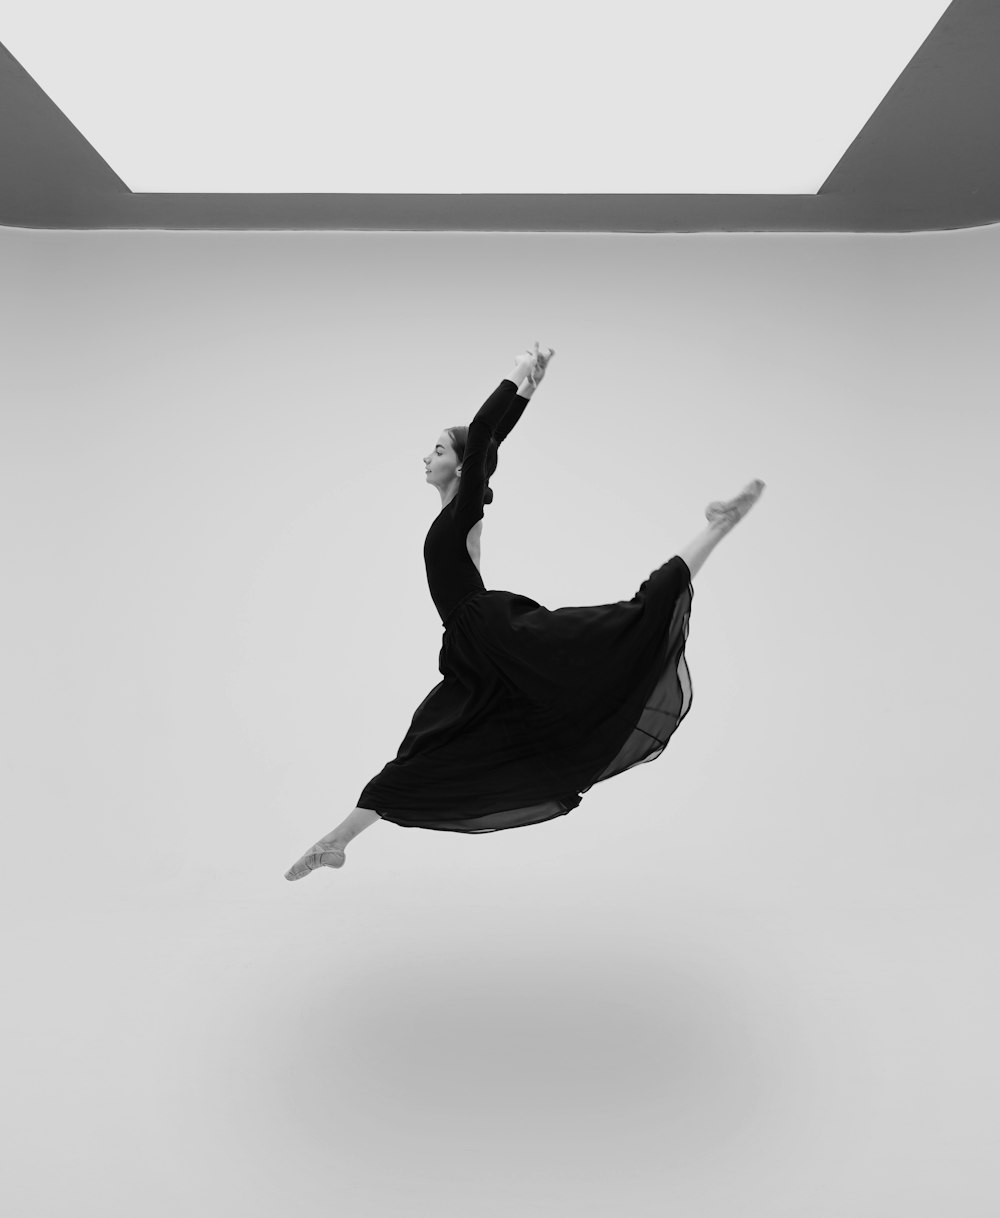 a woman in a black dress is flying through the air